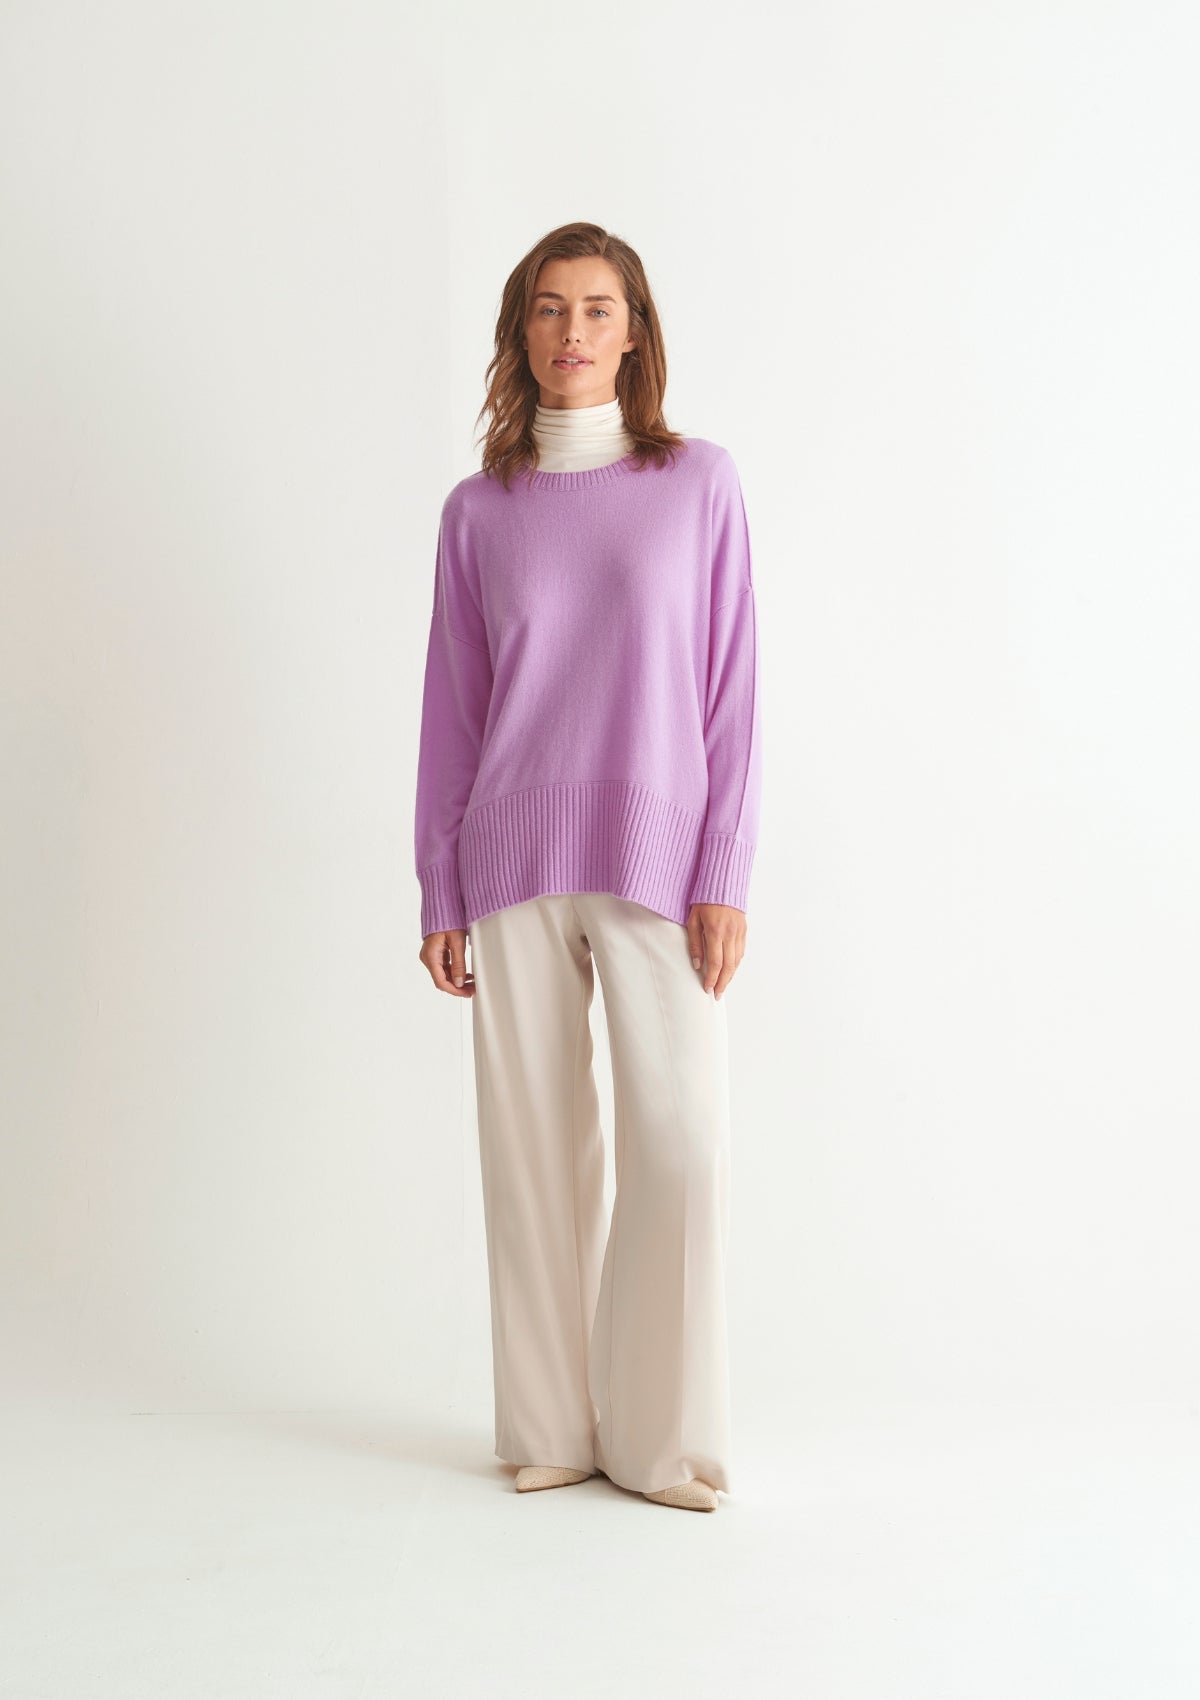 Oversized Cashmere Crew Neck Sweater in Violet